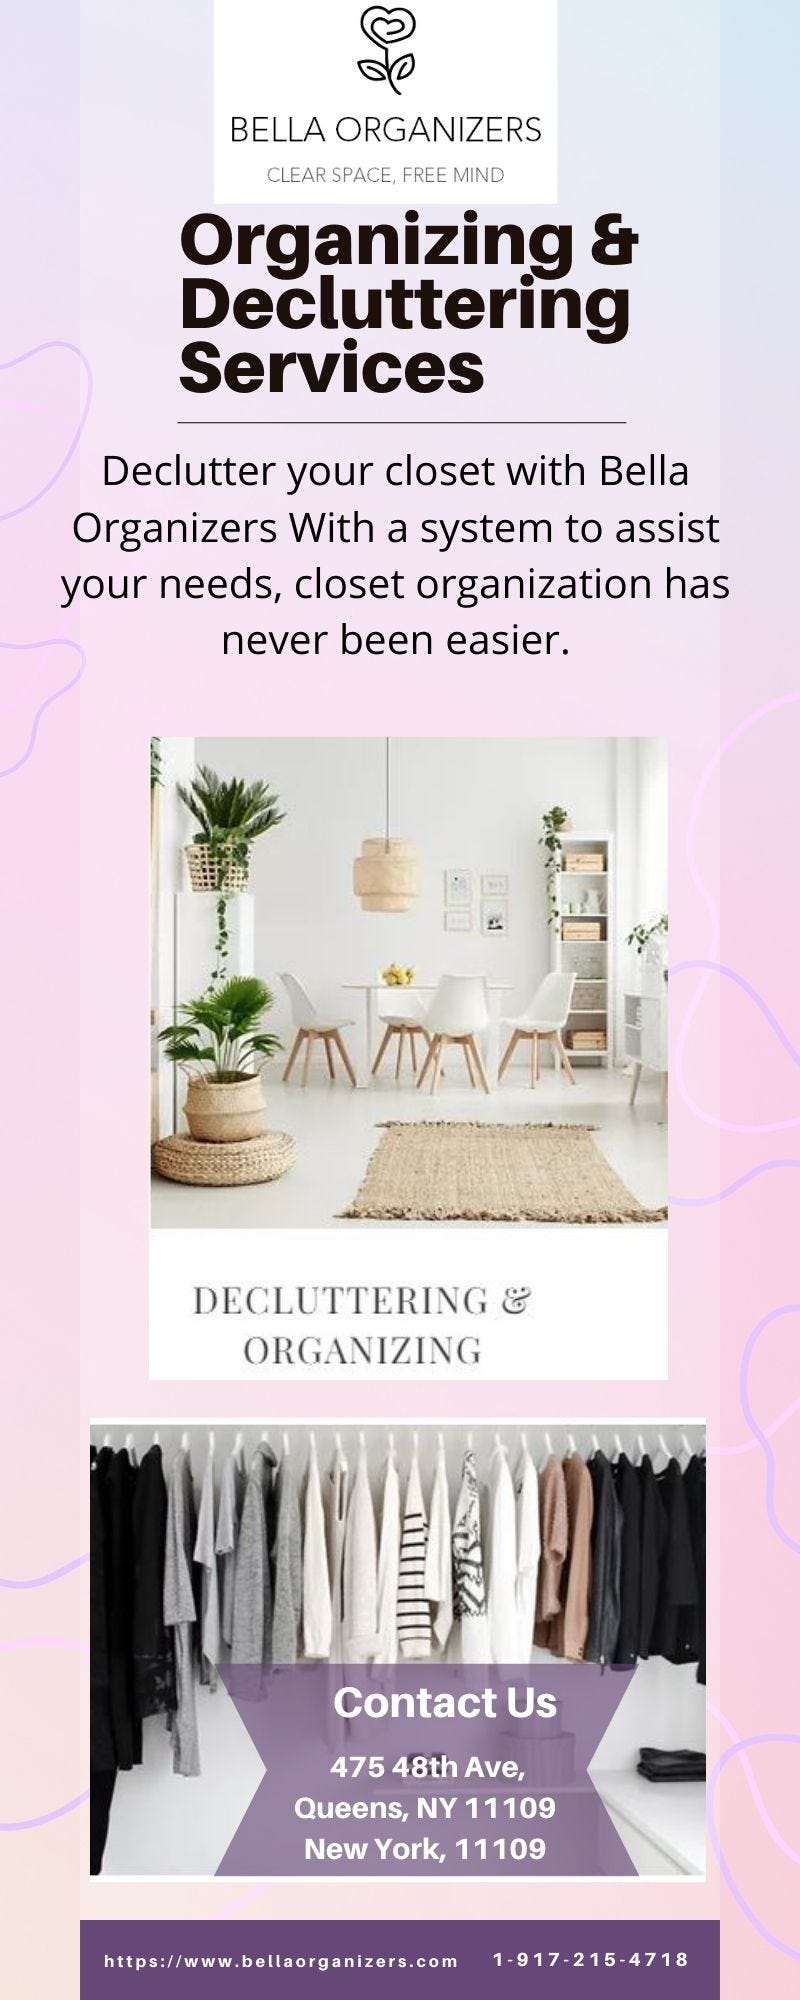 Organizing & Decluttering Services near me at affordable price - bella  organizers - Medium